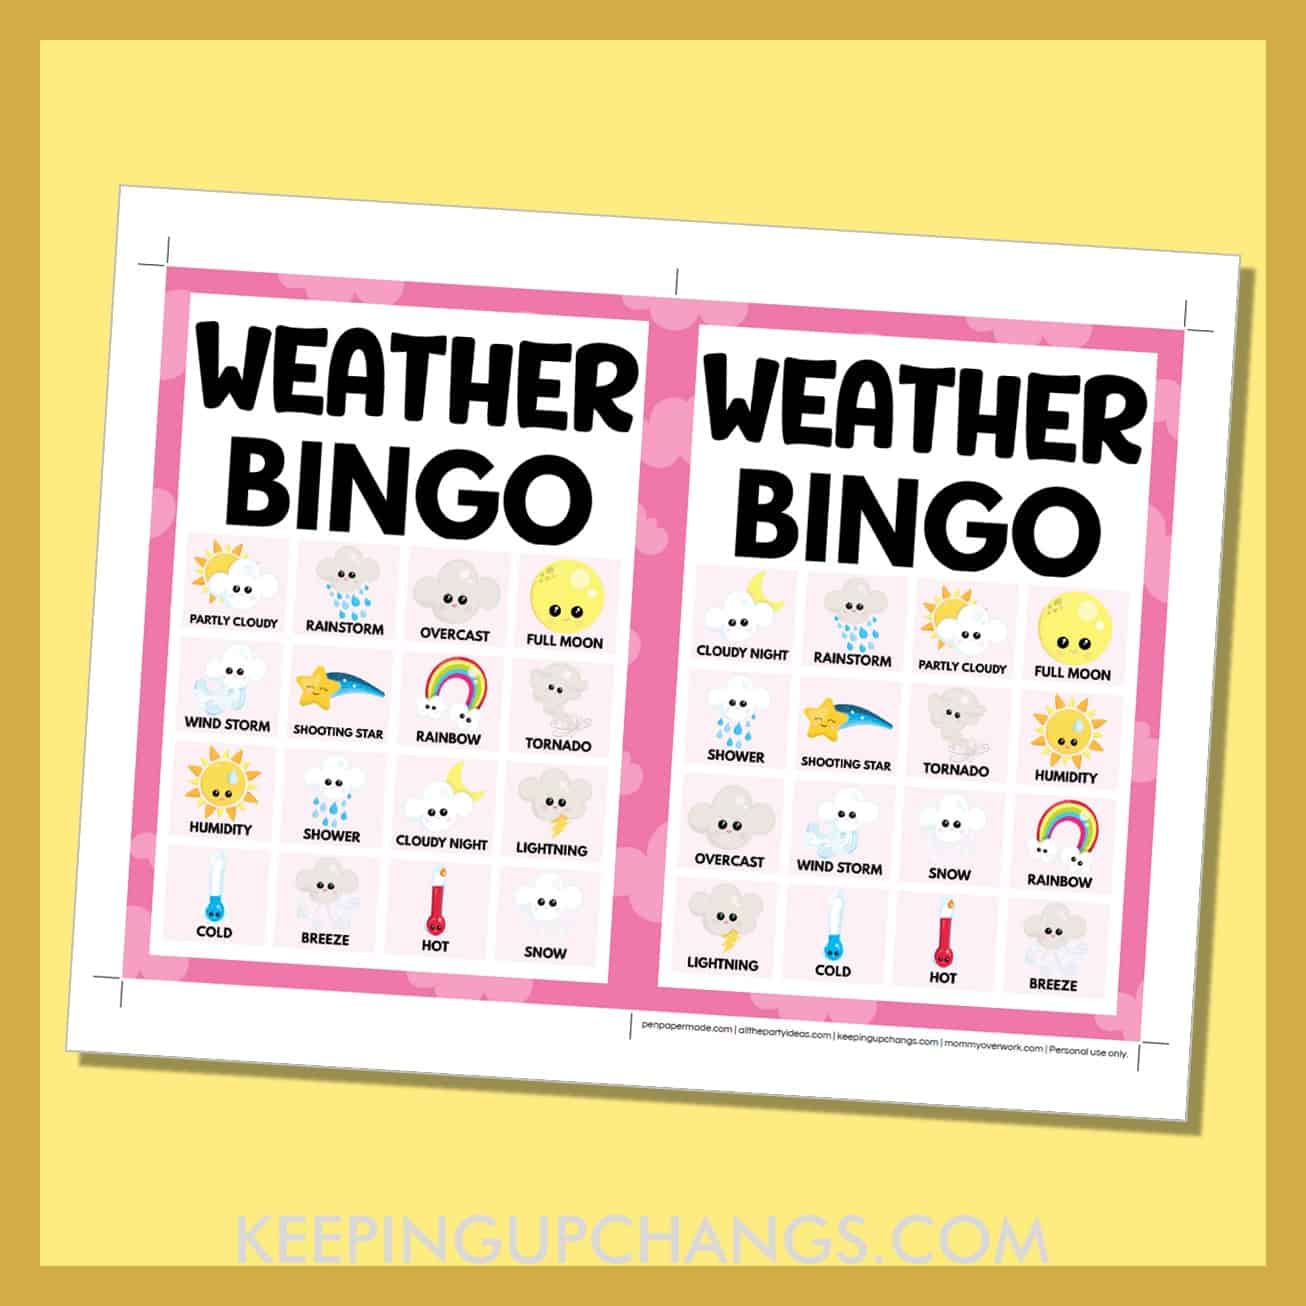 free weather bingo card 4x4 5x7 game boards with images and text words.